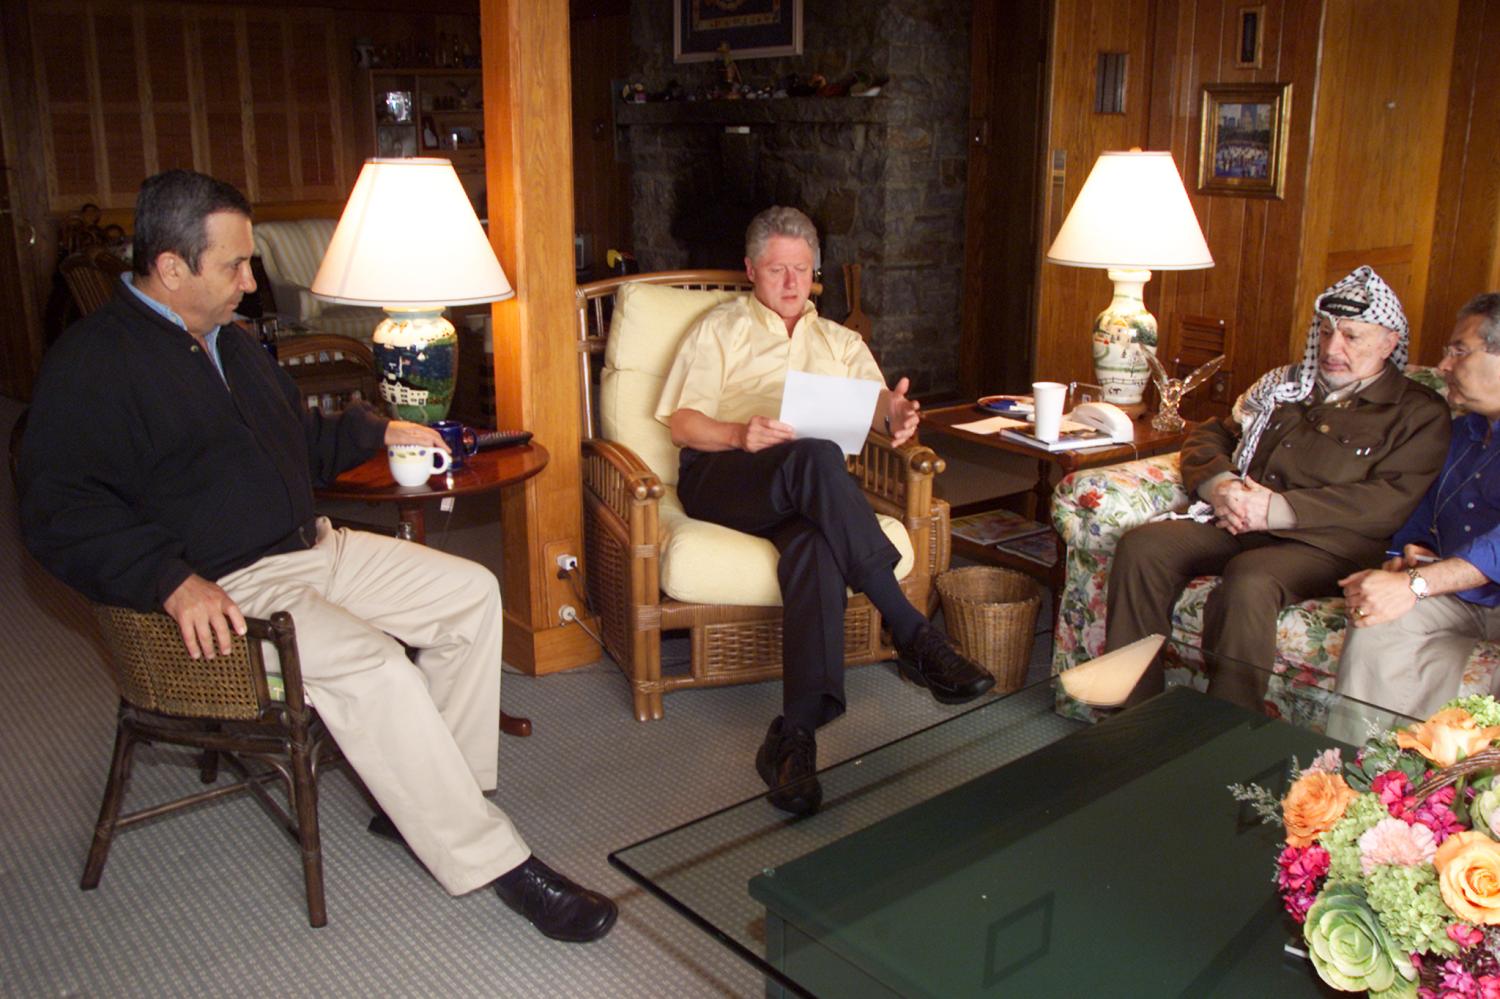 President Clinton meets with Israeli Prime Minister Barak and Palestinian President Yasser Arafat early July 25, 2000 at Camp David near Thurmont, Maryland. The Camp David Middle East peace summit collapsed on Tuesday after 15 days of intense negotiations but President Bill Clinton insisted "significant progress" had been made toward ending the Israeli-Palestinian conflict. - PBEAHULJCAN